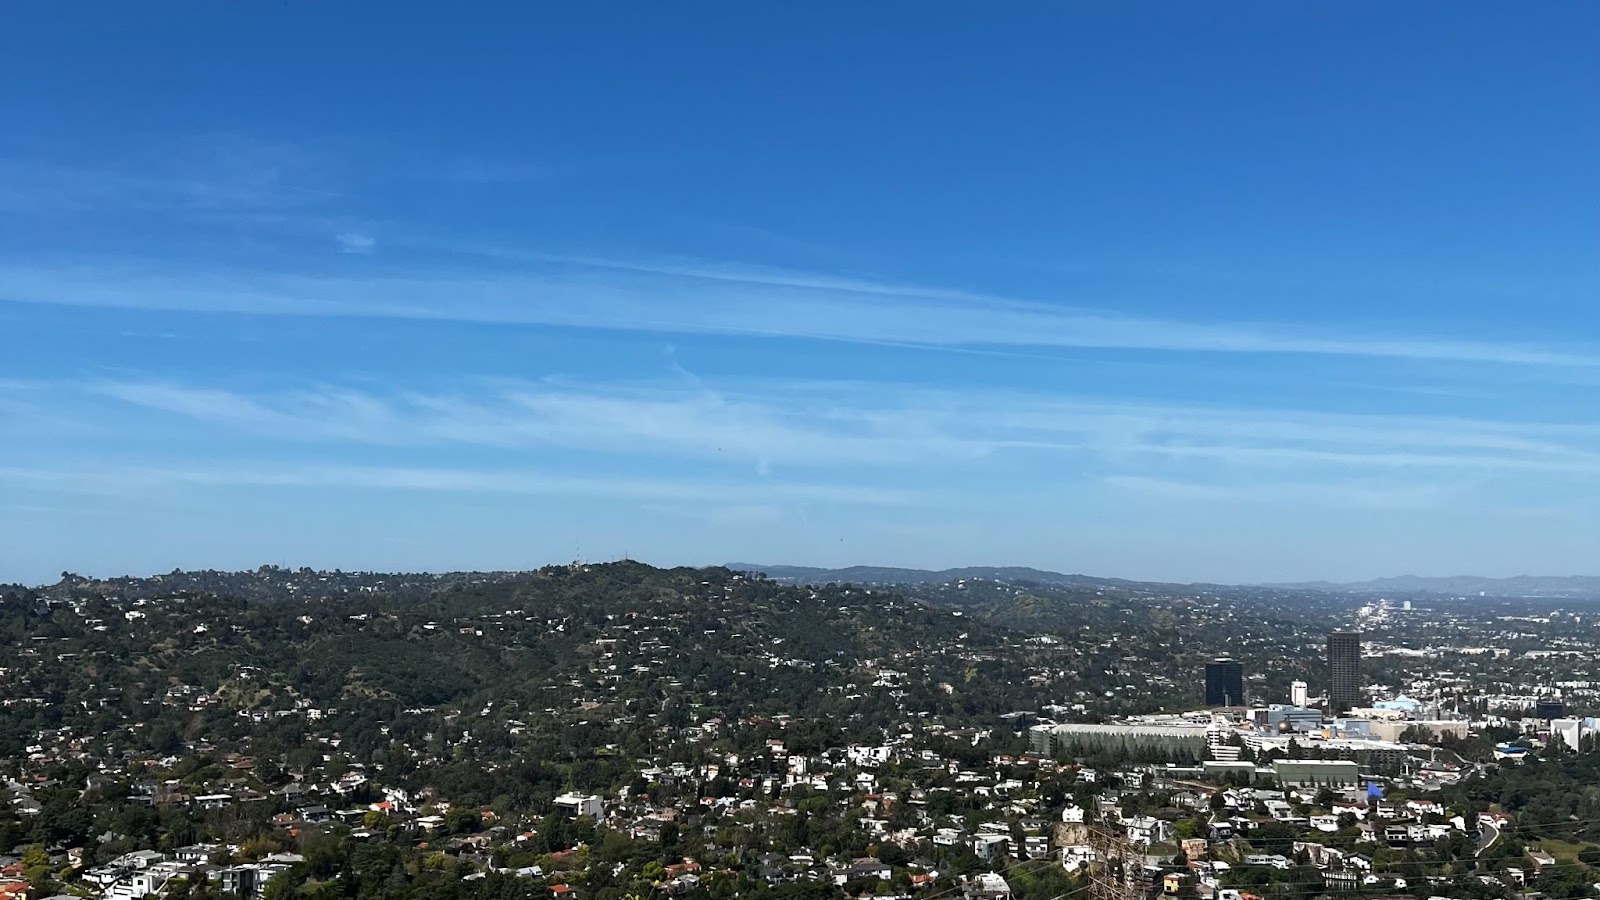 The view from Wisdom Tree, which is one of the best hikes in the San Fernando Valley.